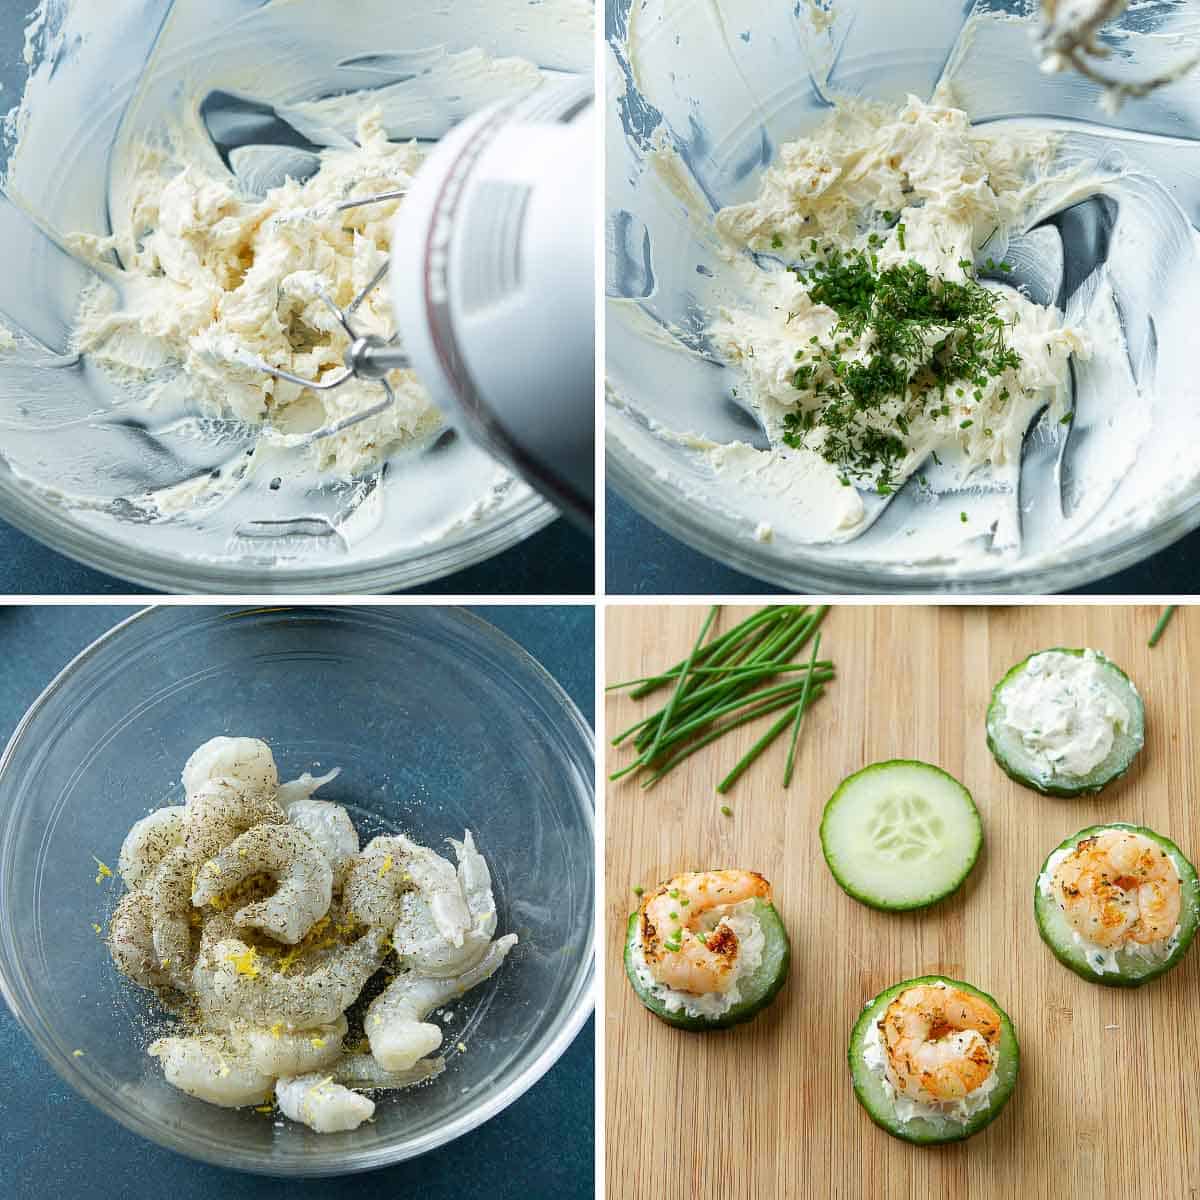 Collage of steps for making Cucumber Shrimp Appetizers. Cream cheese and shrimp each in bowls, appetizers on a wooden board.